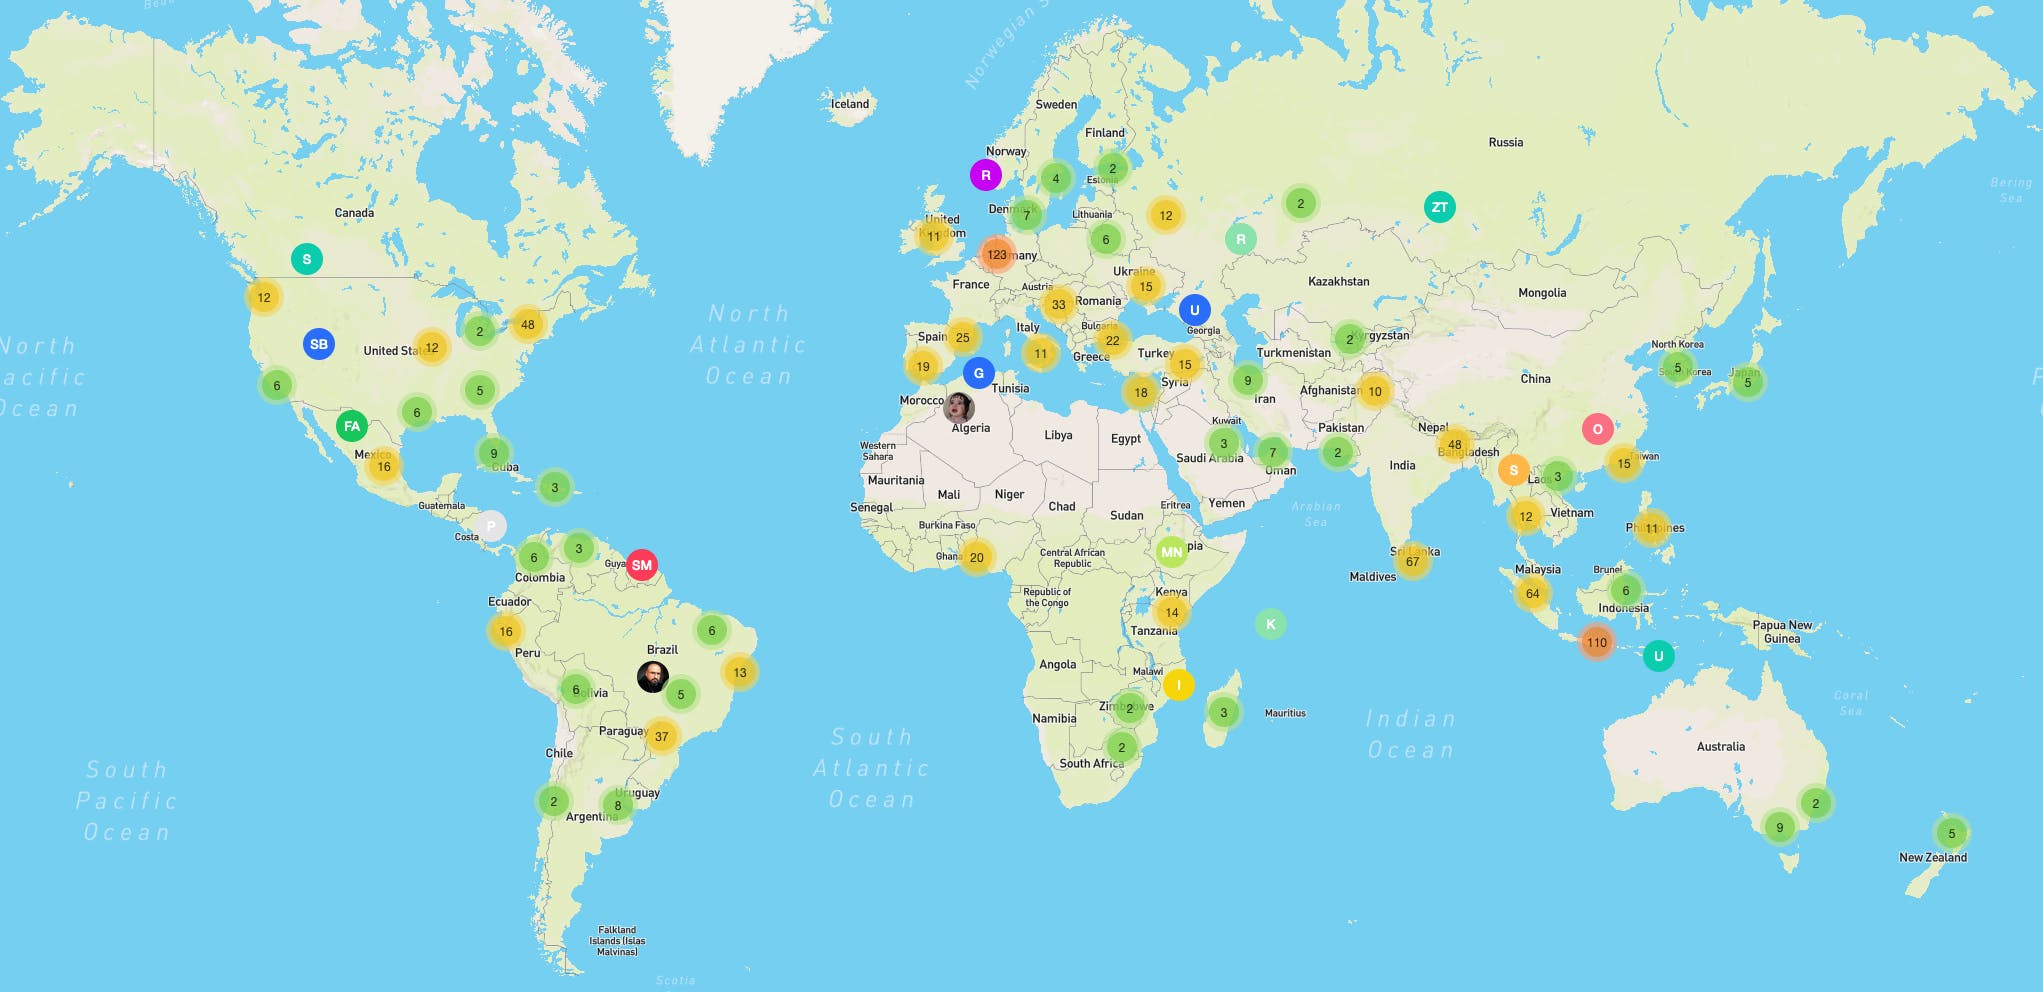 7000 developers from more than 120 countries use Qovery